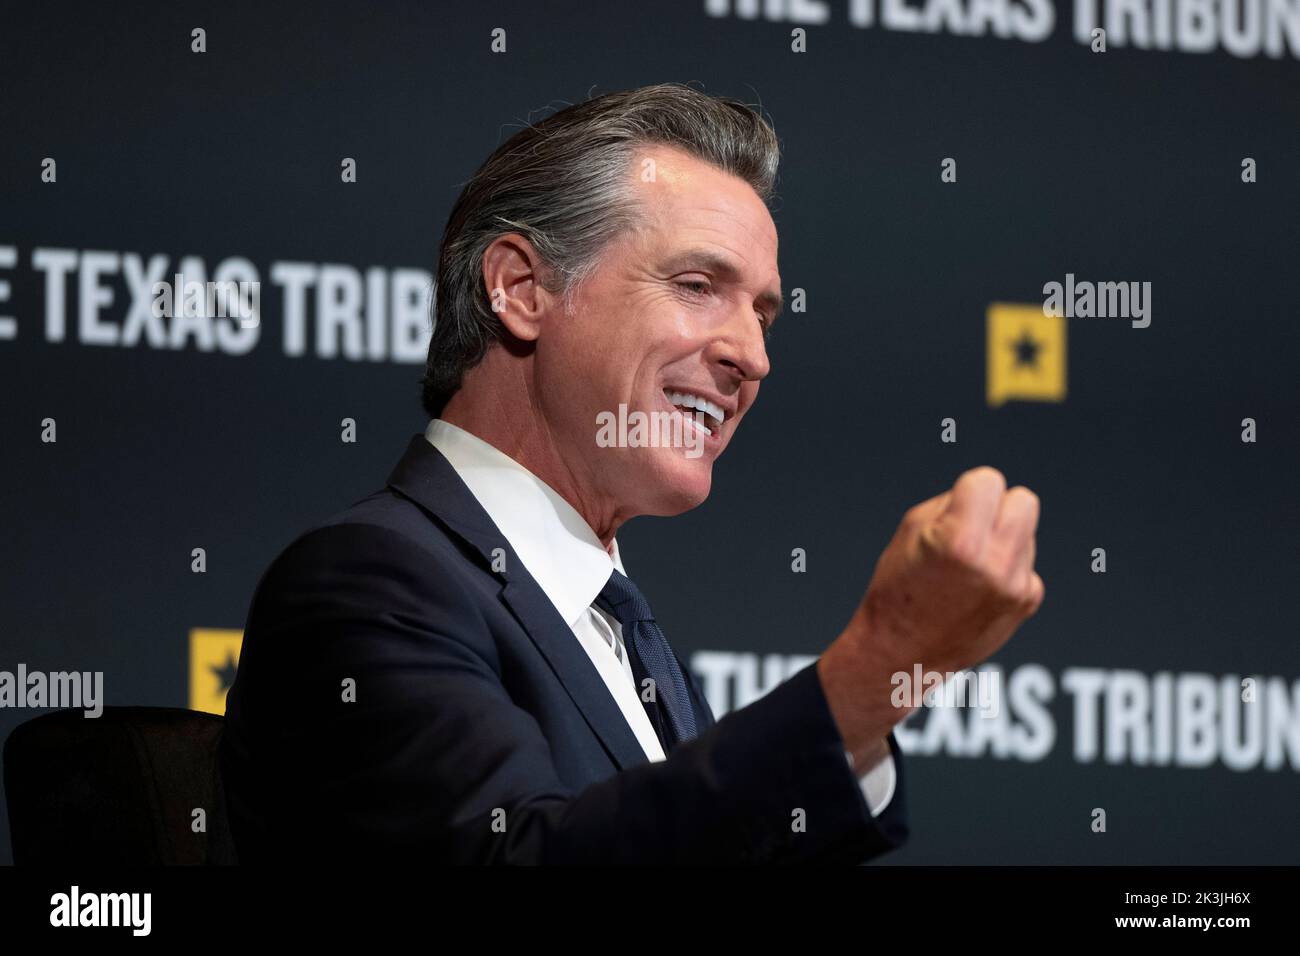 Austin Texas USA, September 24, 2022: California Democratic governor GAVIN NEWSOM speaks about the state of U.S. politics during an interview session at the annual Texas Tribune Festival in downtown Austin. Newsom, a former mayor of San Francisco, is mentioned as a possible 2024 U.S. presidential candidate. Stock Photo